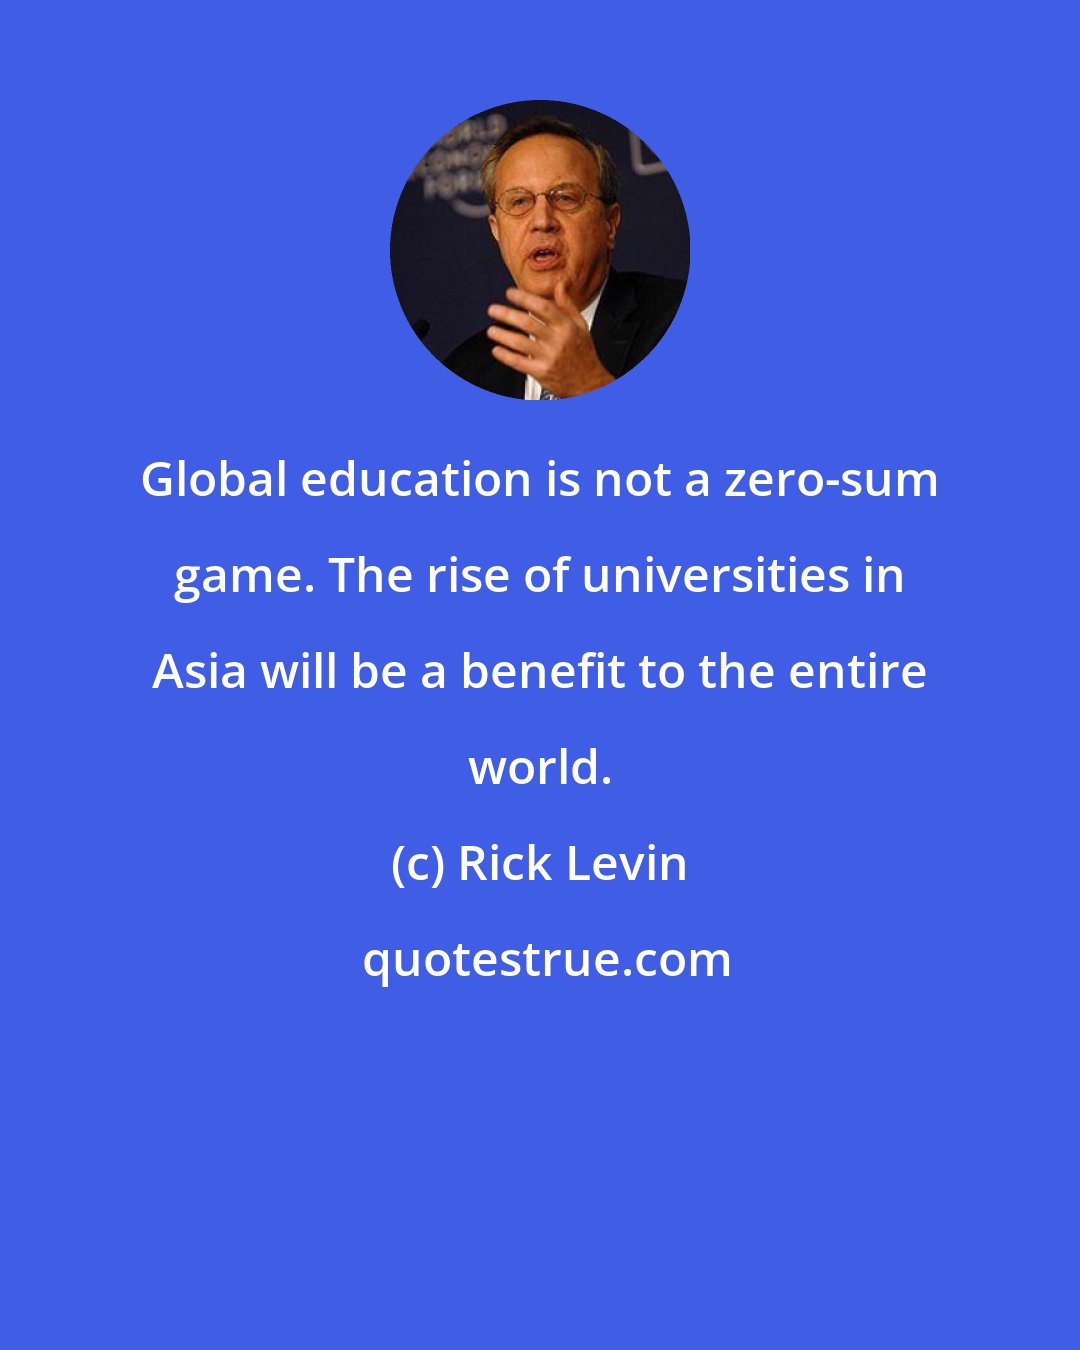 Rick Levin: Global education is not a zero-sum game. The rise of universities in Asia will be a benefit to the entire world.